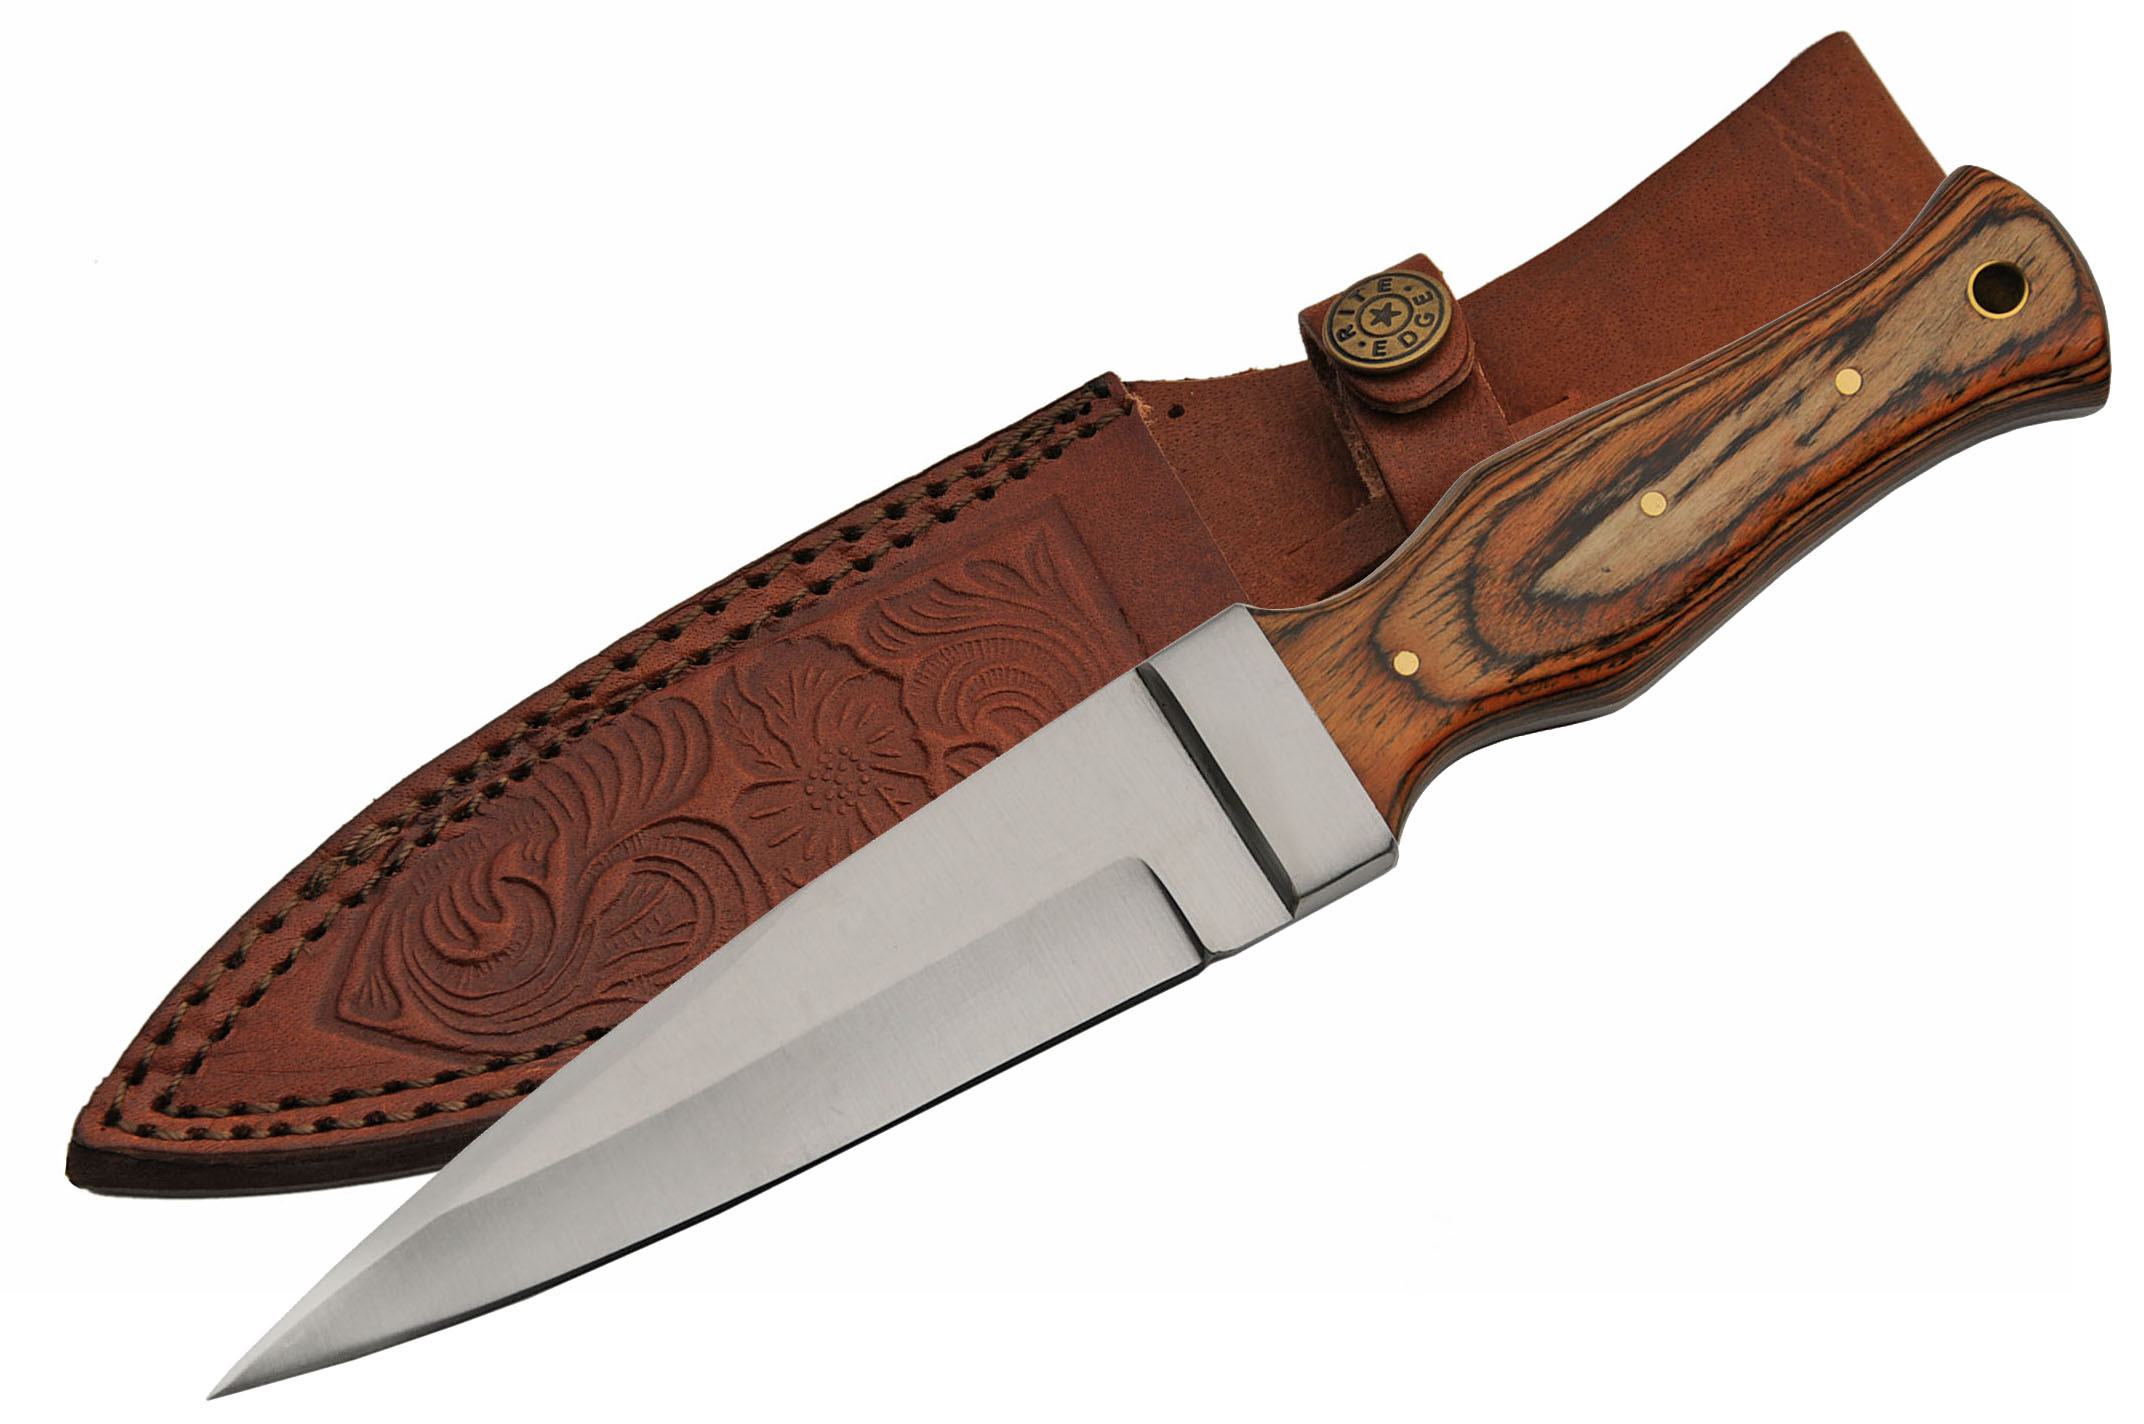 Boot Knife 9in. Overall Brown Wood Handle Tactical Blade + Leather Sheath